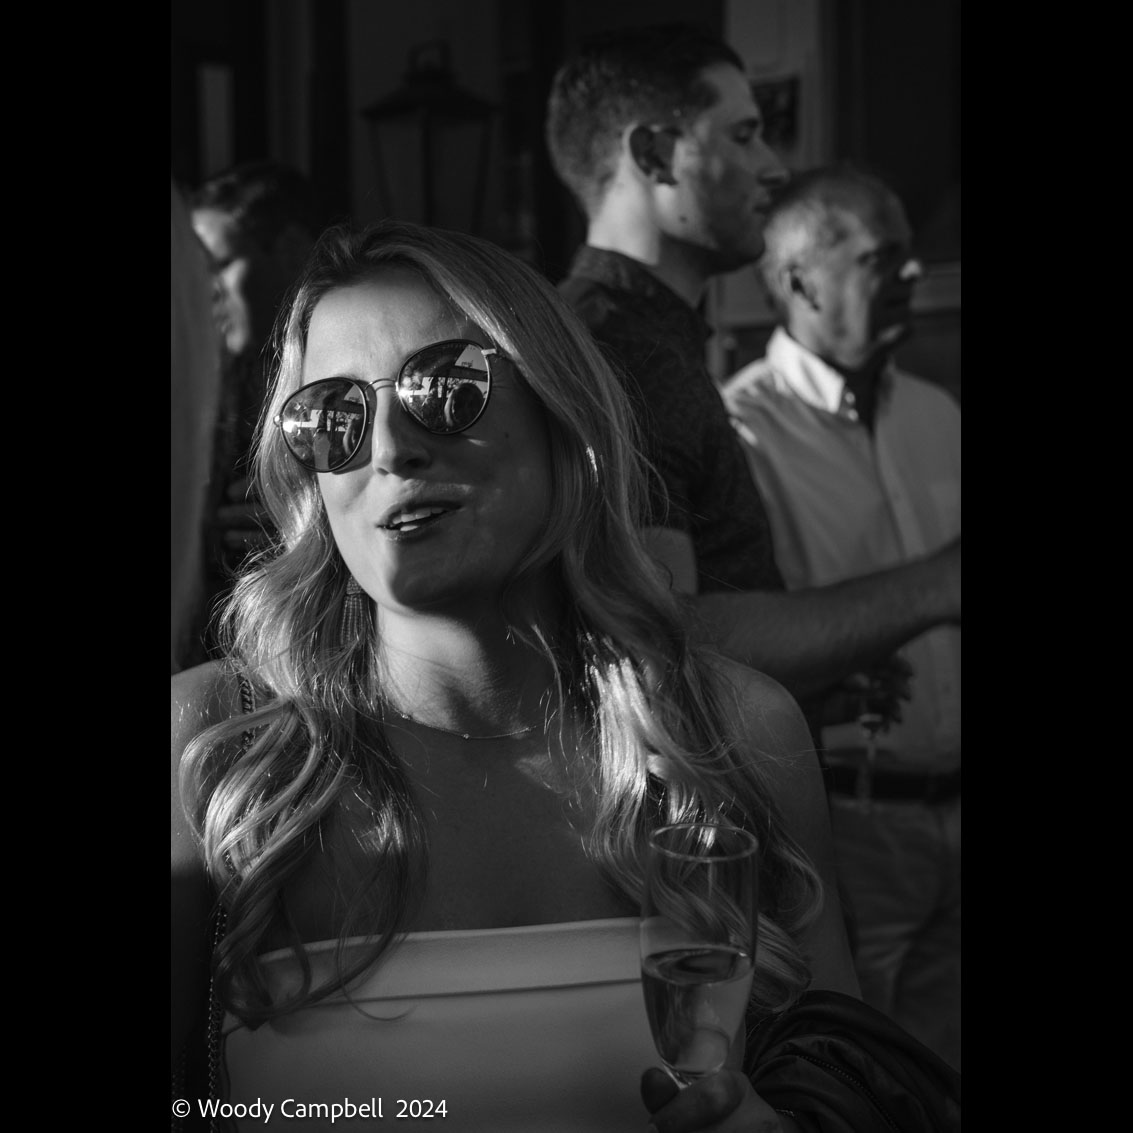 Looking back  to party in La Jolla  on this day 6  years ago: day  3122  of 1 photo every day for the rest of my life.
#BlackAndWhite #BNW #Photo #Monochrome #DailyPhoto
#Leica
#party #sunglasses #LaJolla
 #PartyMemories #SunglassesStyle